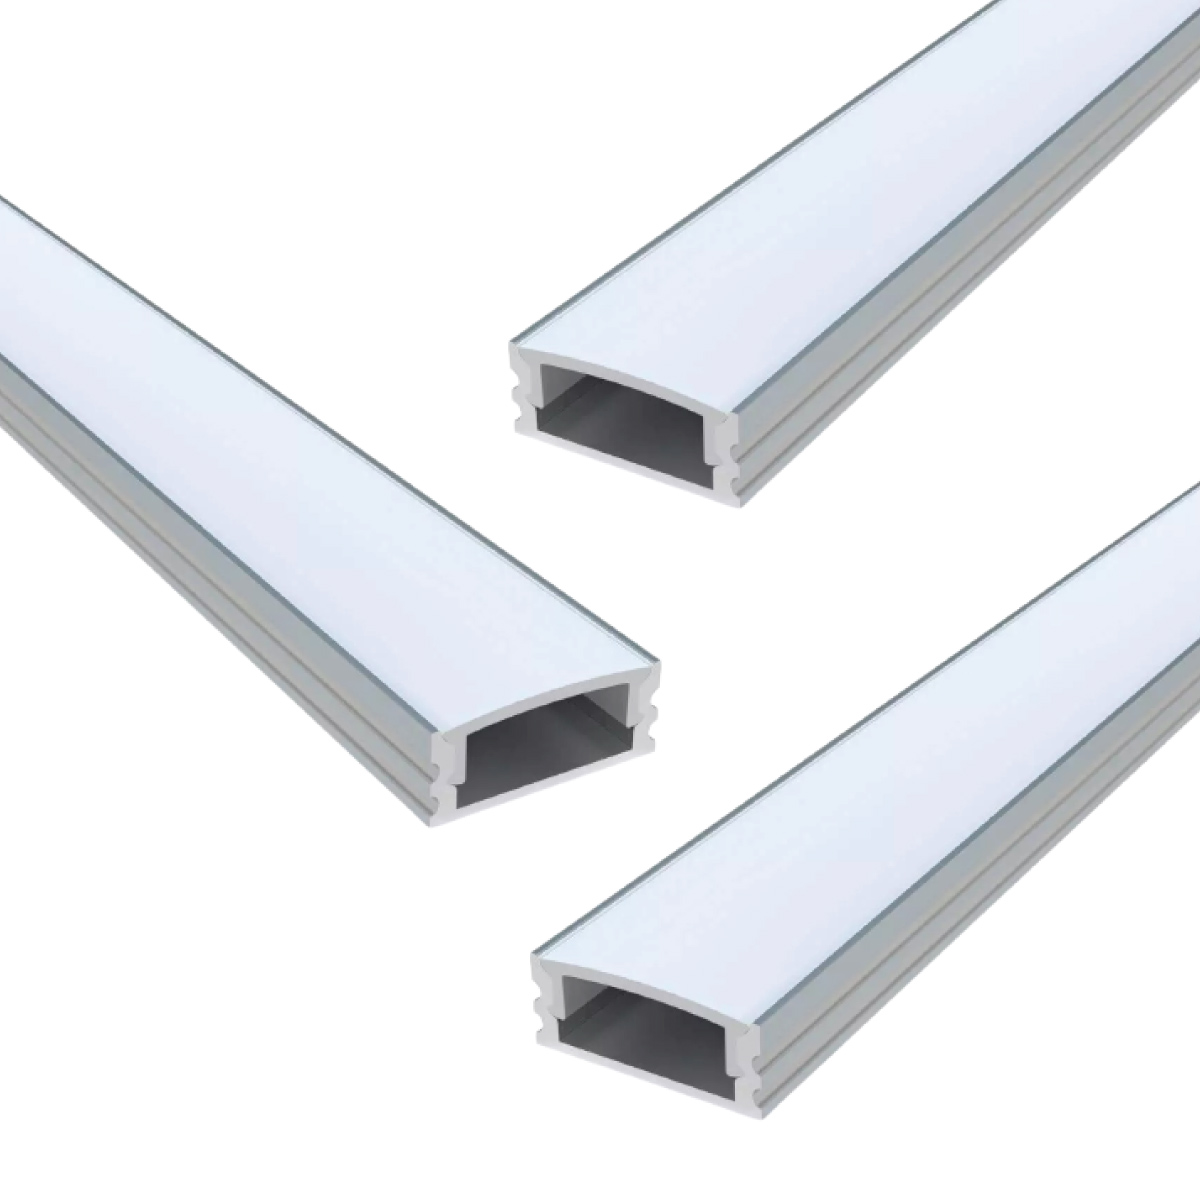 View Pack of 3 Shallow 7mm Surface Mounted LED Aluminium Profiles 1 Metre Long information